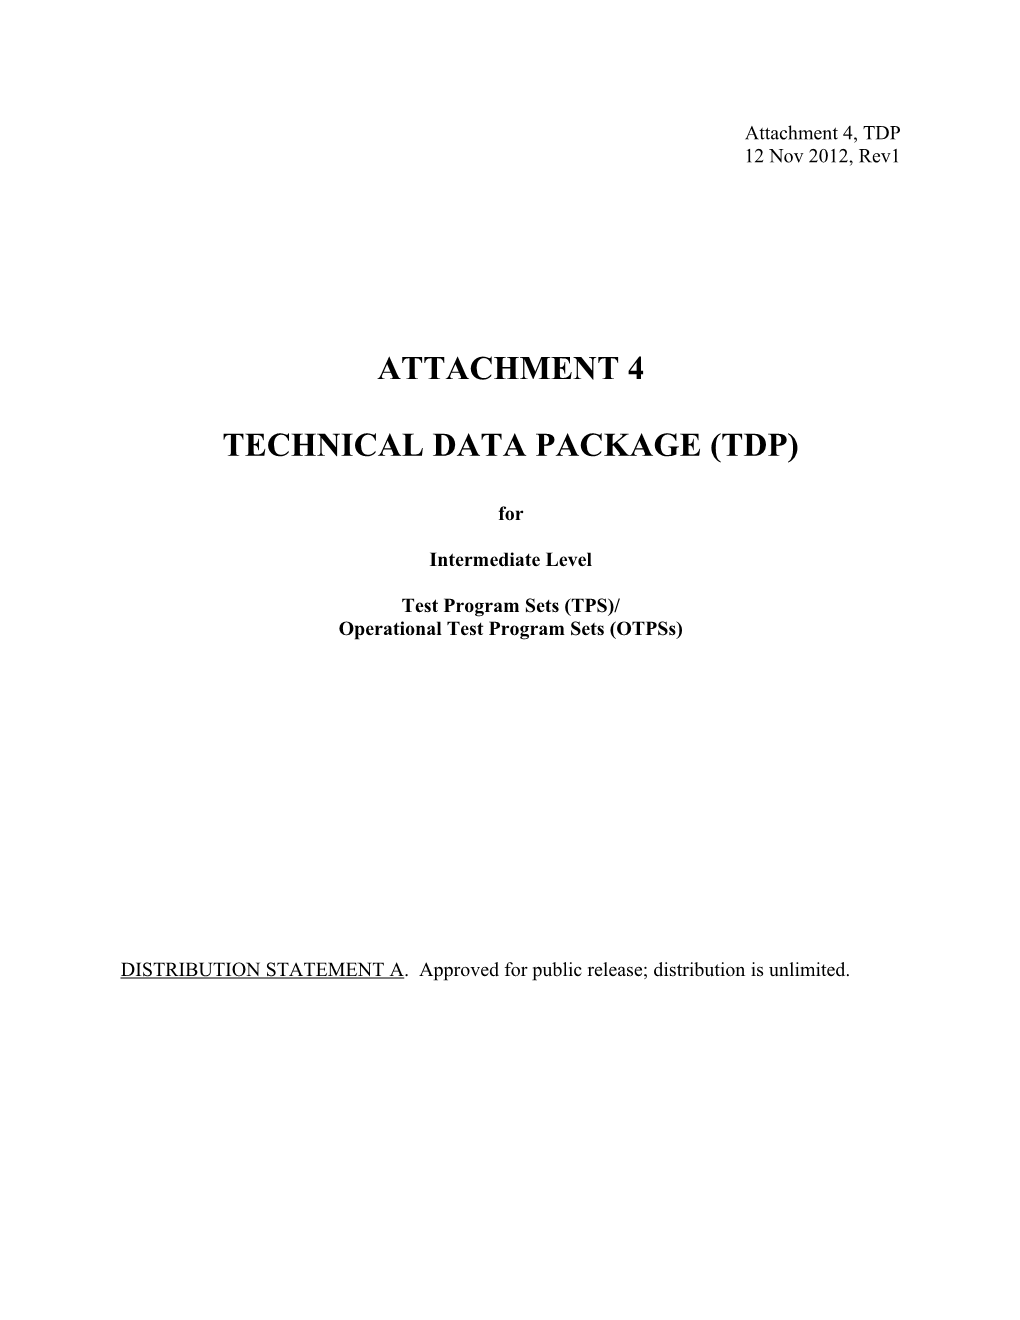 Technical Data Package (Tdp)